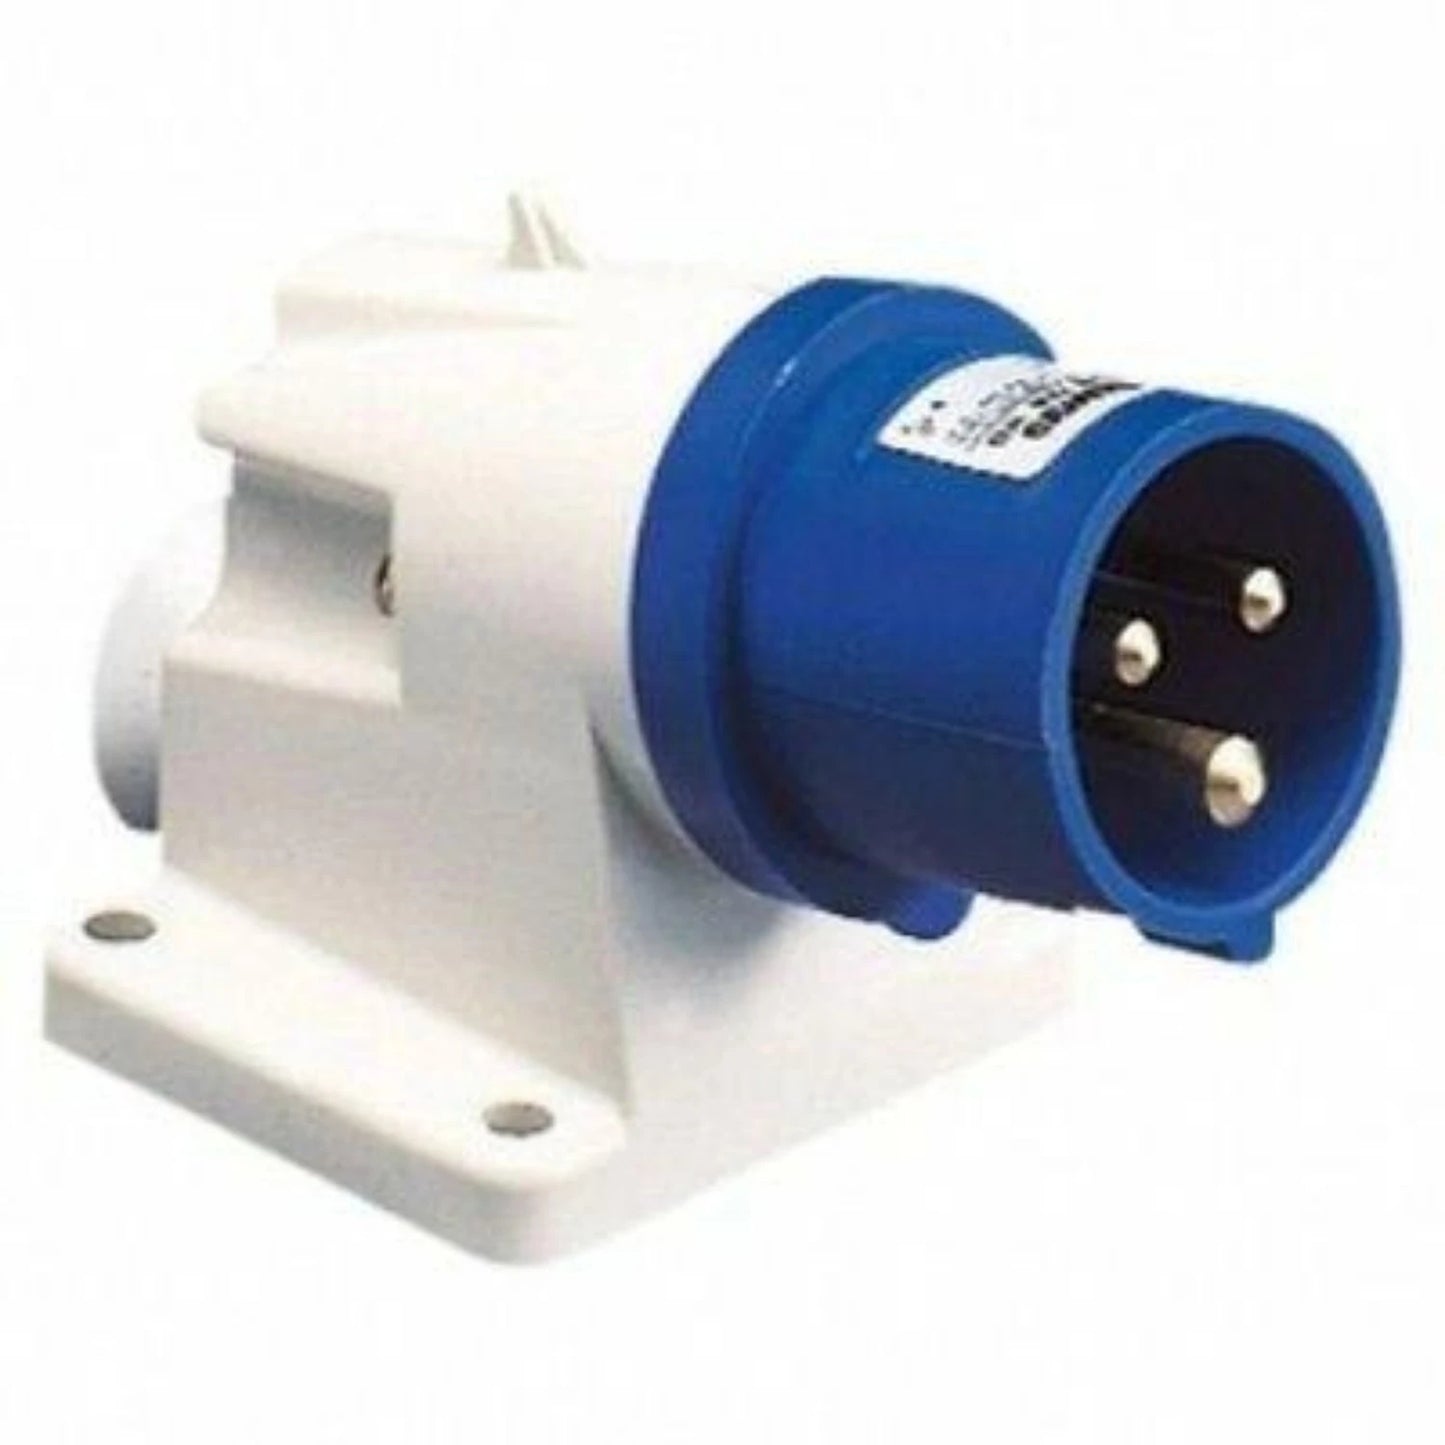 Re-Wireable Surface-Mount Male Plug 16 Amps @ 250V - Commando/PWR-CMD-M12341